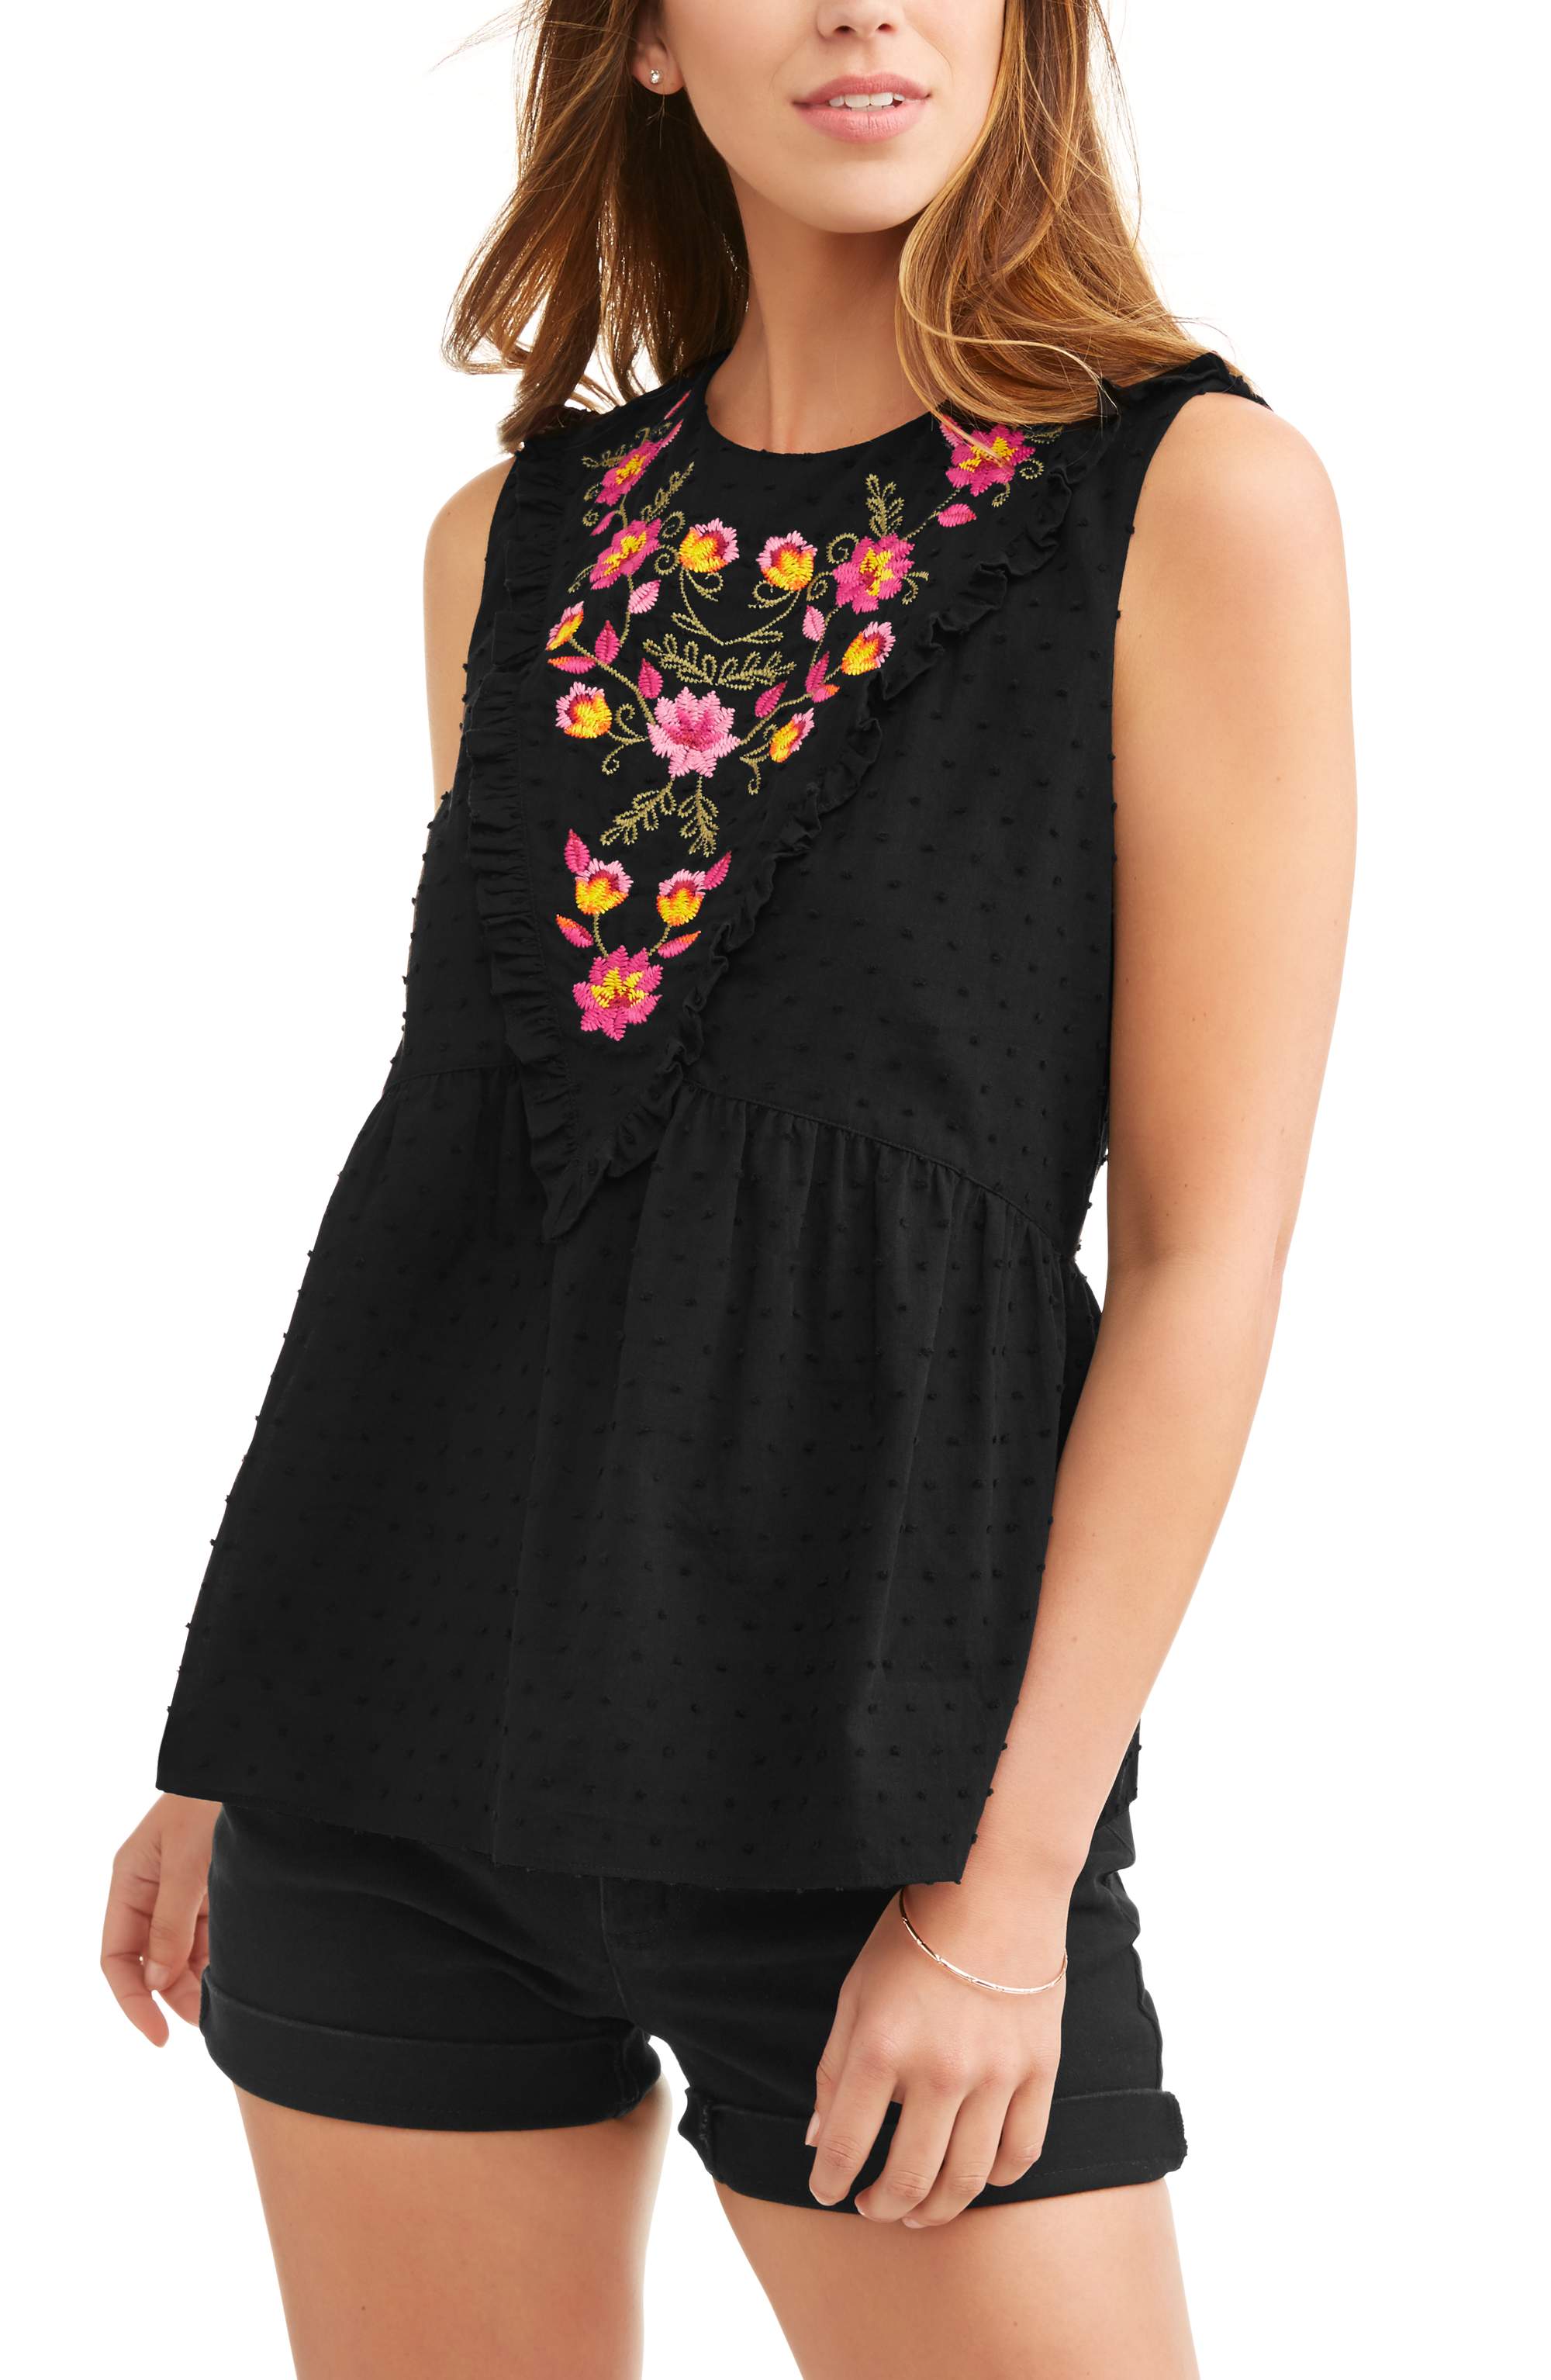 Women's Swiss Dot Embroidered Tank Top - image 1 of 2